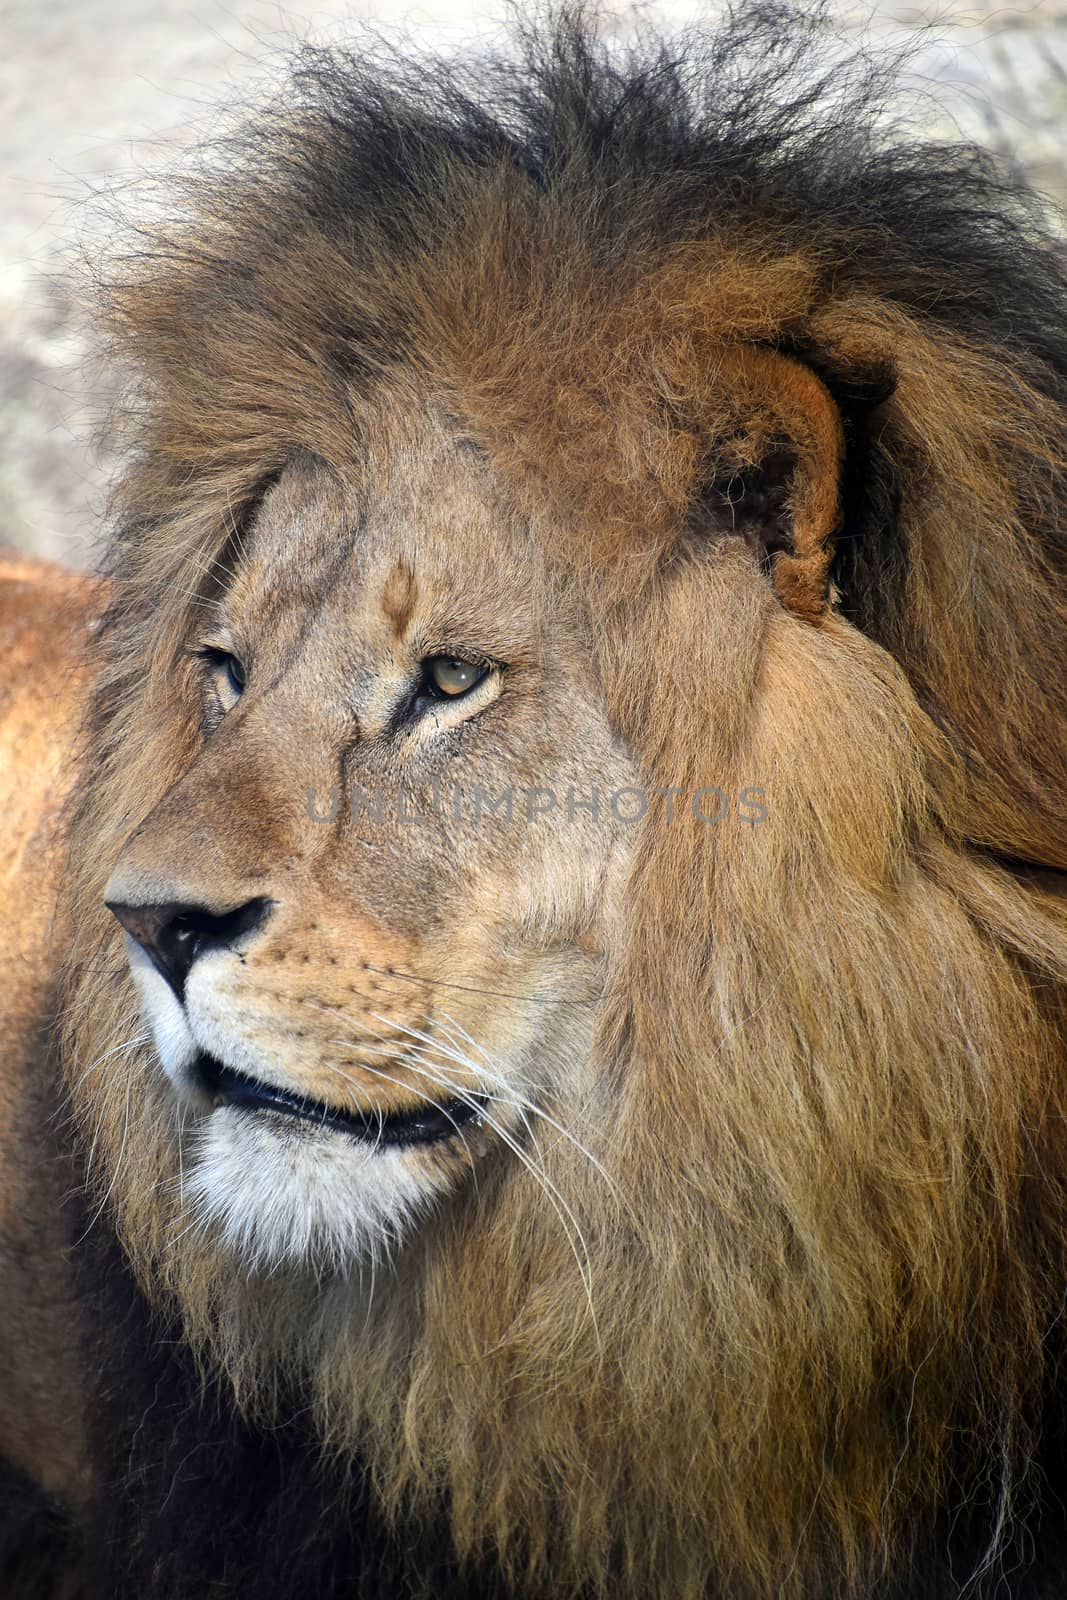 Close up side profile portrait of mature male African lion with beautiful mane, looking away